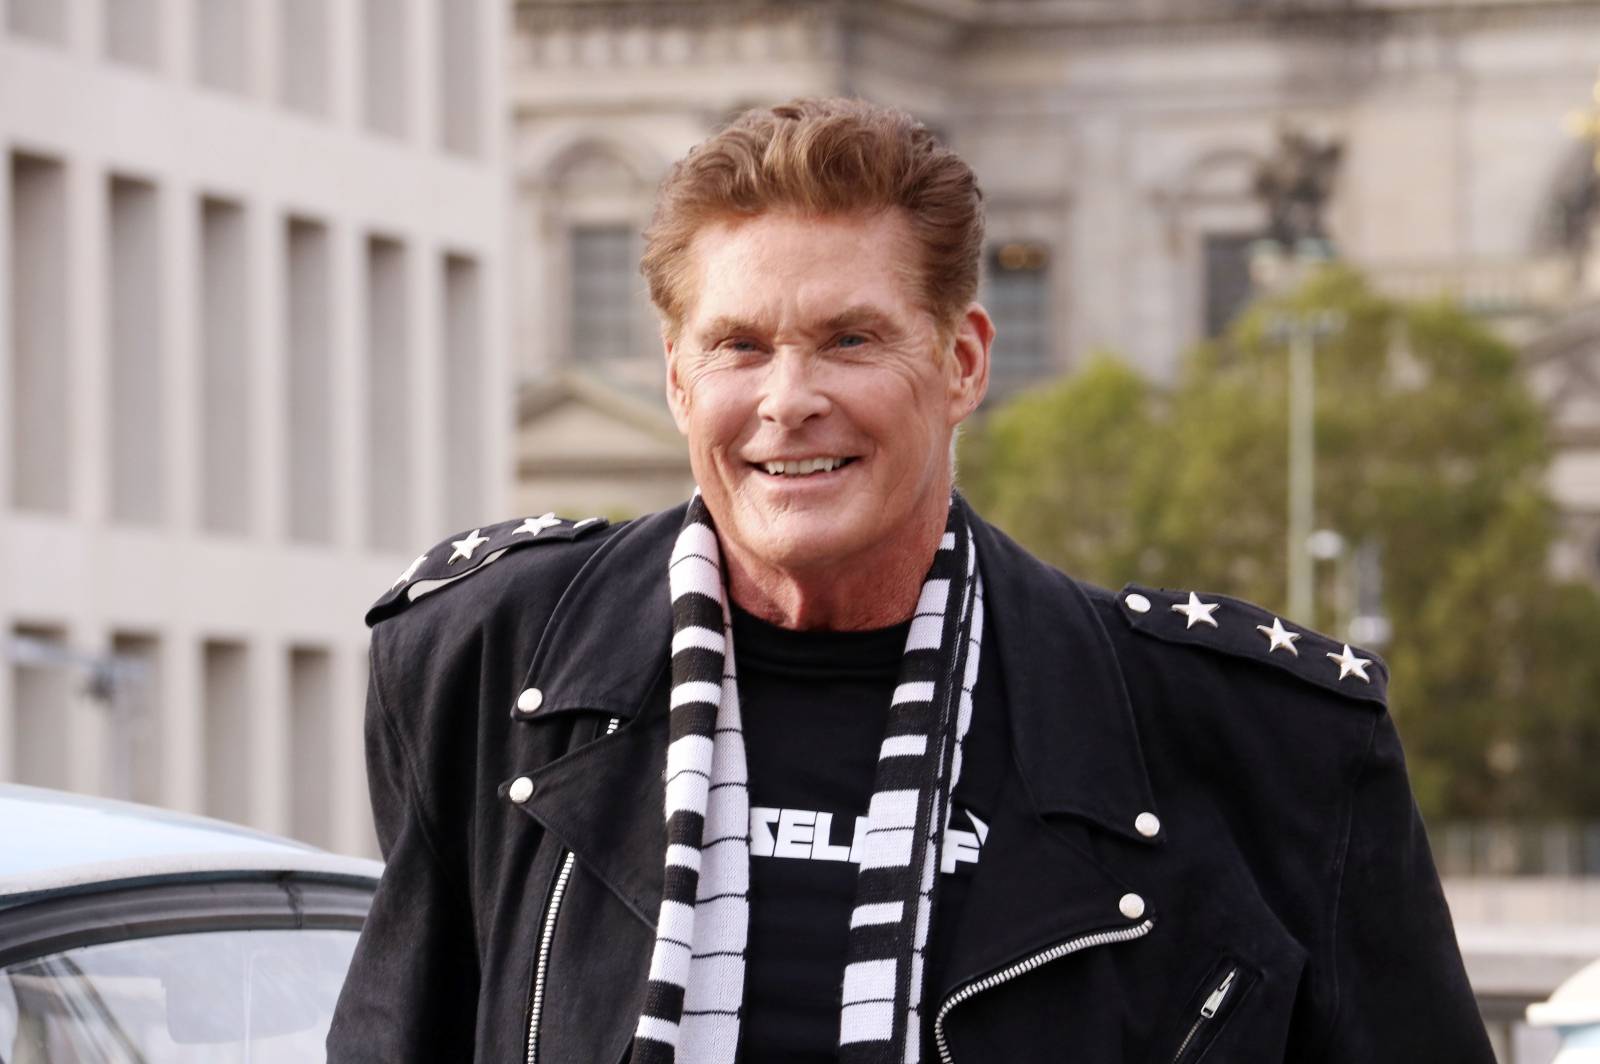 David Hasselhoff honks with Trabi drivers 'Looking for Freedom' in Berlin